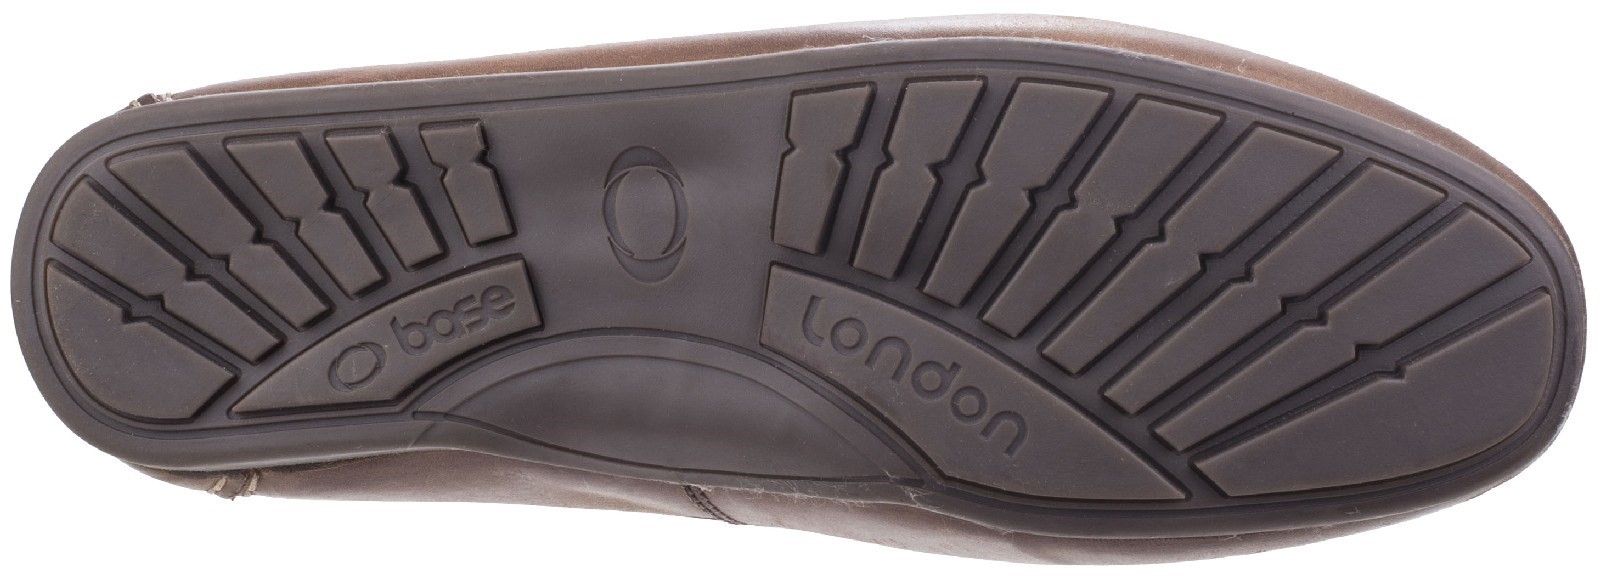 An update of one of our signature looks, Palmer from the Roadster range, is a classic brand slip on. Waxy/Perf leather uppers teamed with eye catching weave detailing with a comfortable rubber sole. A treaded rubber sole offers a confident stride. High quality waxy leather with deep shine. 
High quality leather lining.